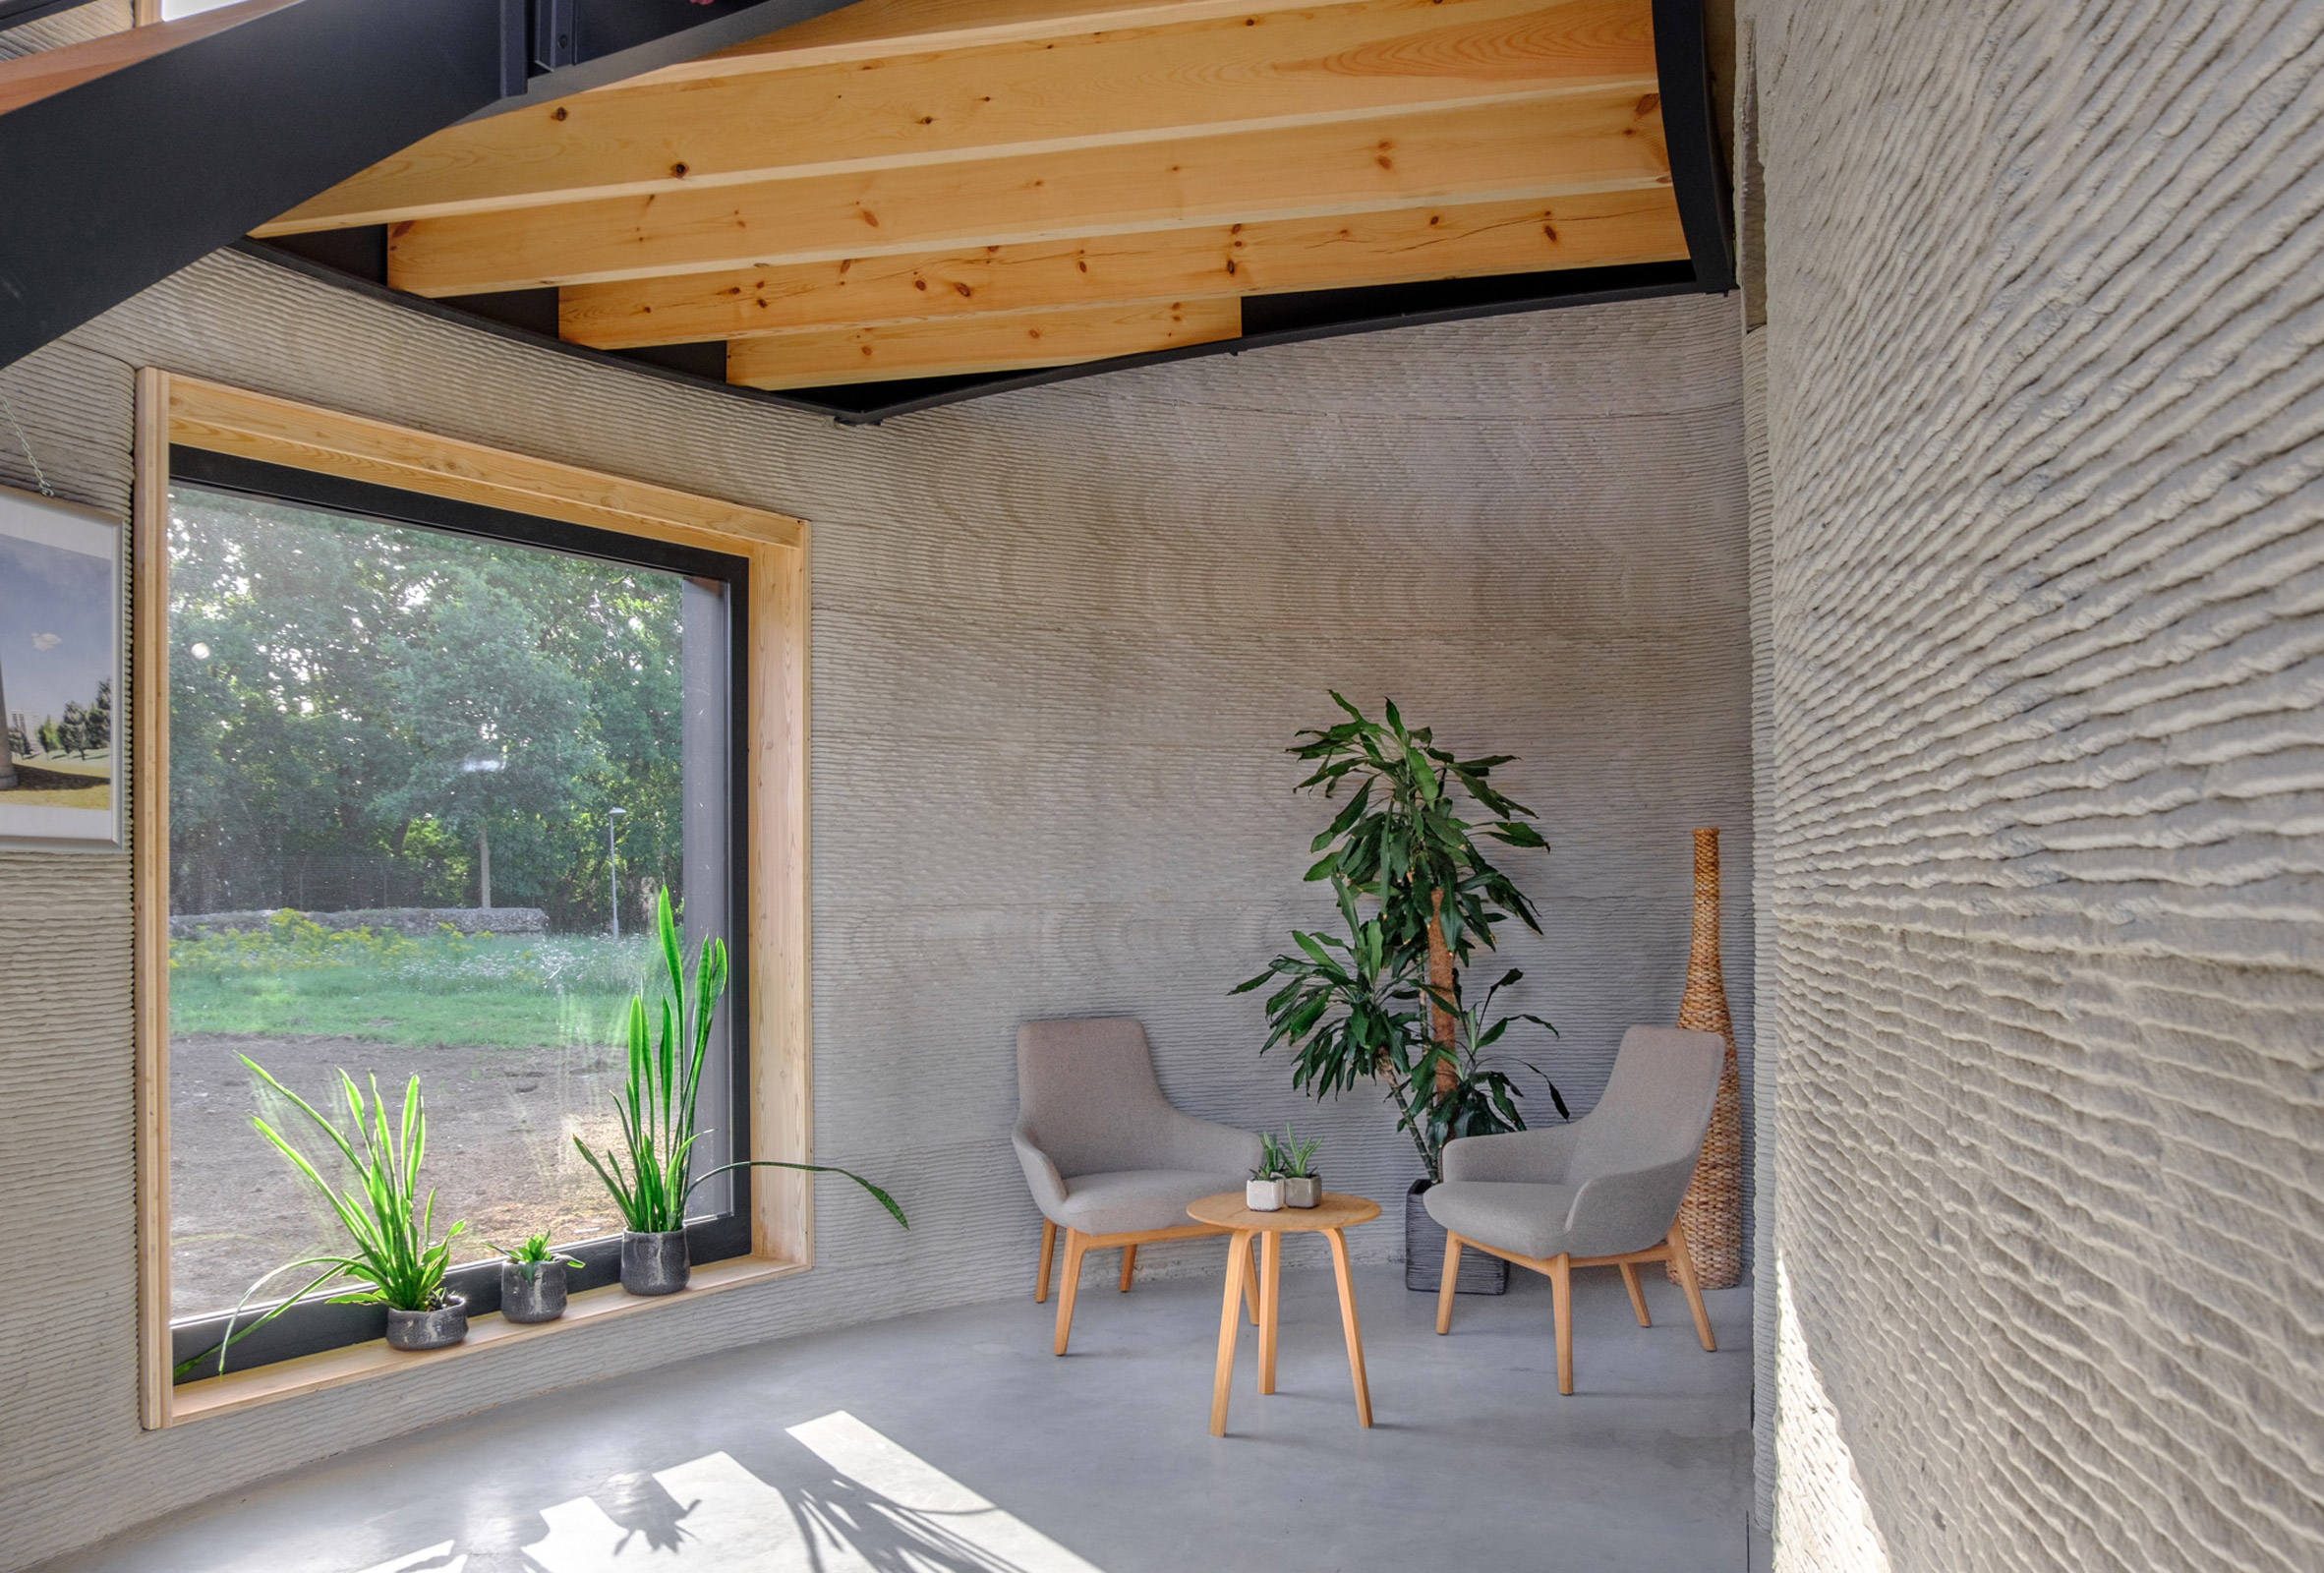 The walls of the 3D-printed home were left exposed